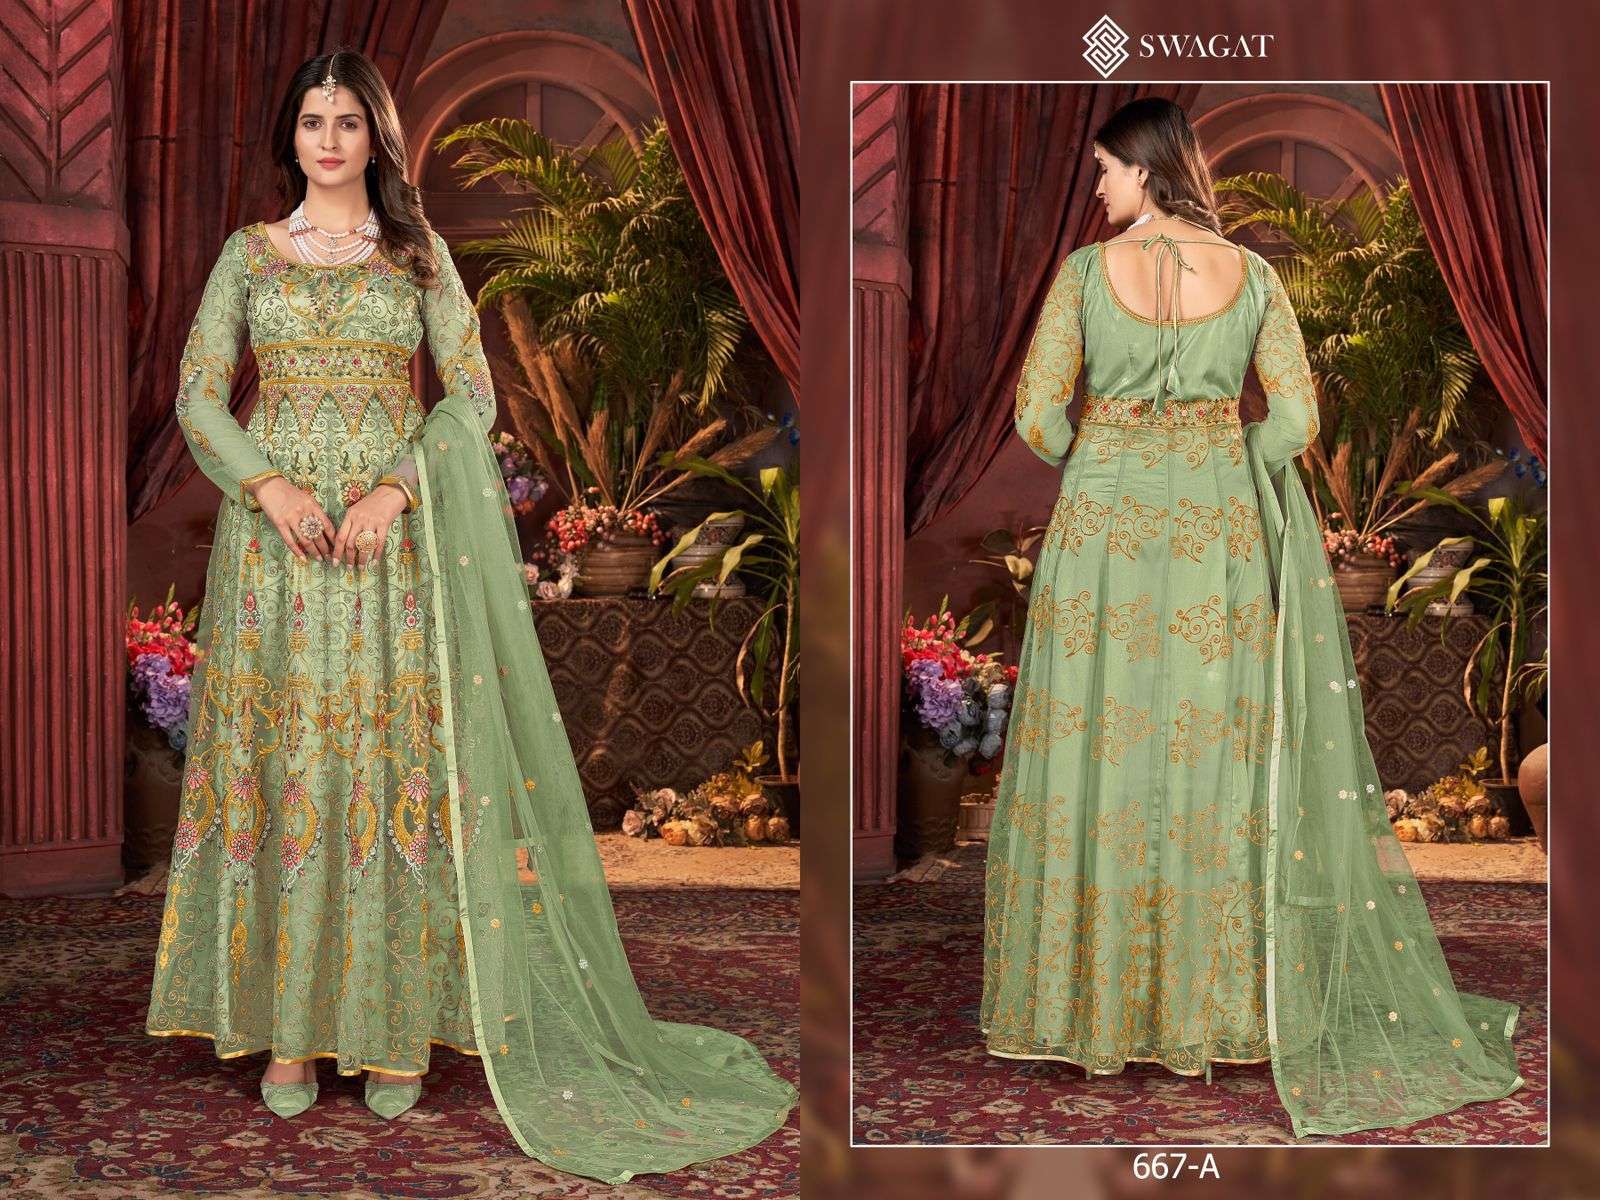 Swagat 667 Colours By Swagat 667-A To 667-D Series Beautiful Anarkali Suits Colorful Stylish Fancy Casual Wear & Ethnic Wear Net Dresses At Wholesale Price